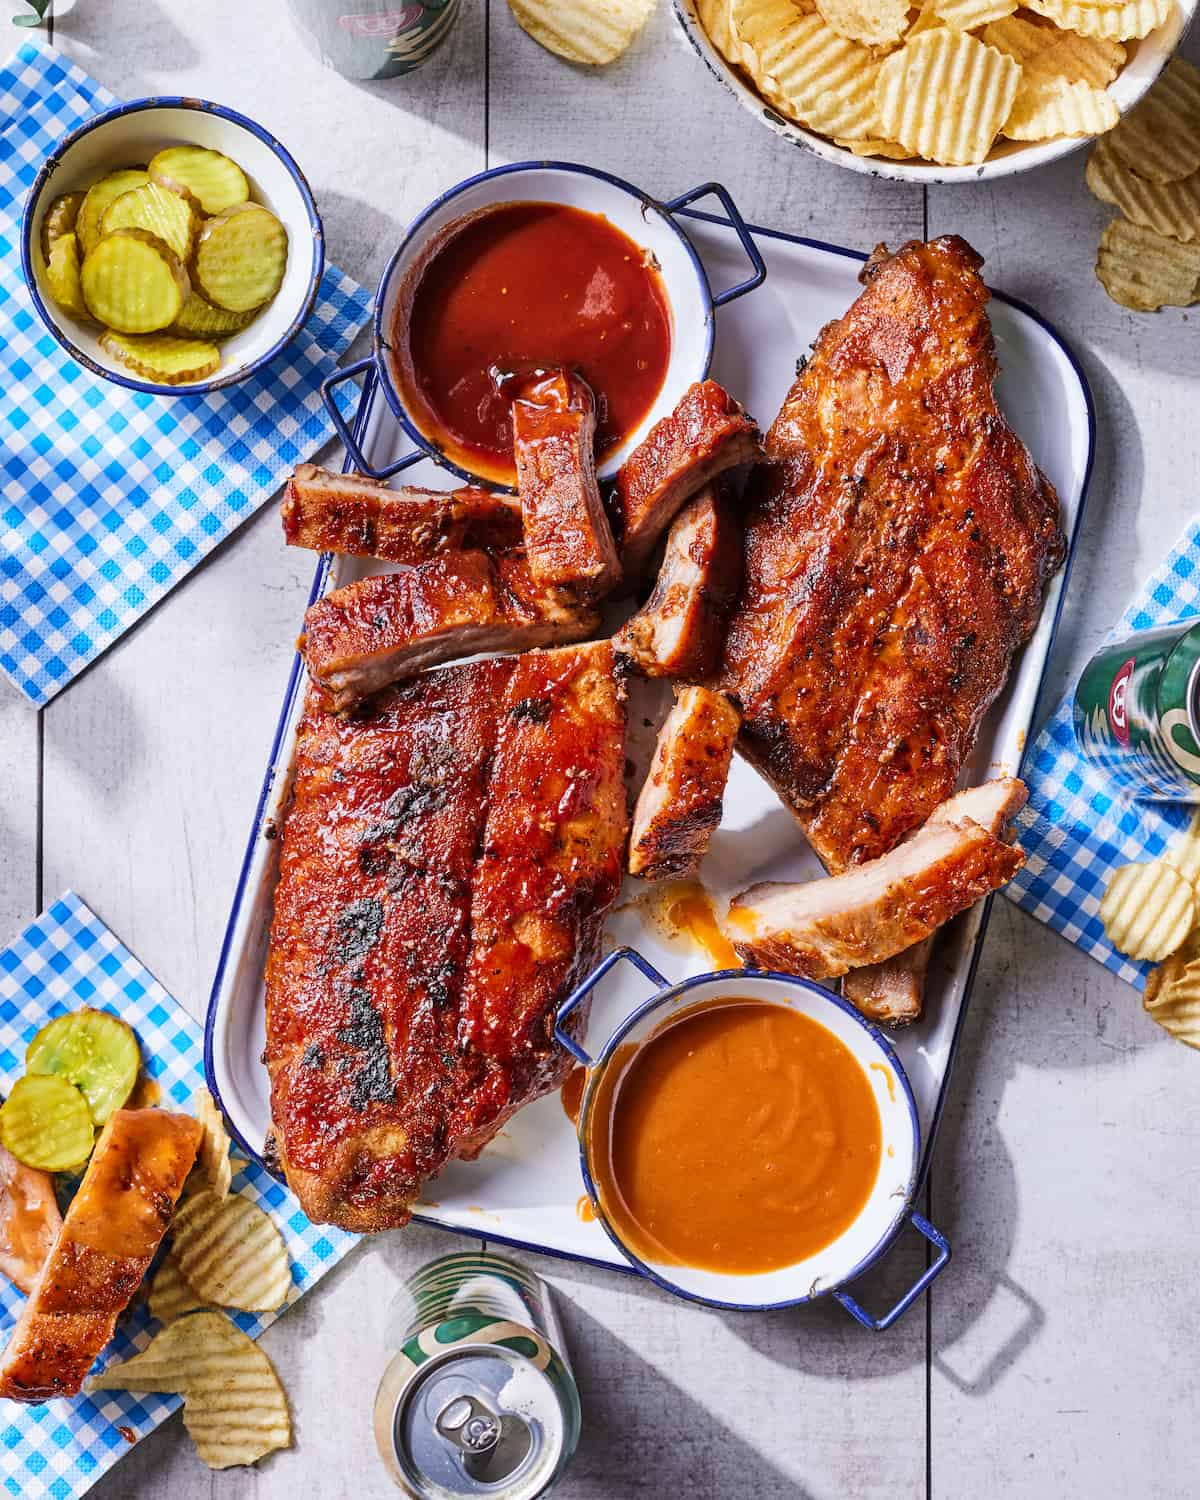 A big platter of BBQ Ribs, BBQ sauces in shallow bowls for dipping, sides of sliced pickles, and ruffle chips spread out on a white wooden table with blue and white gingham napkins